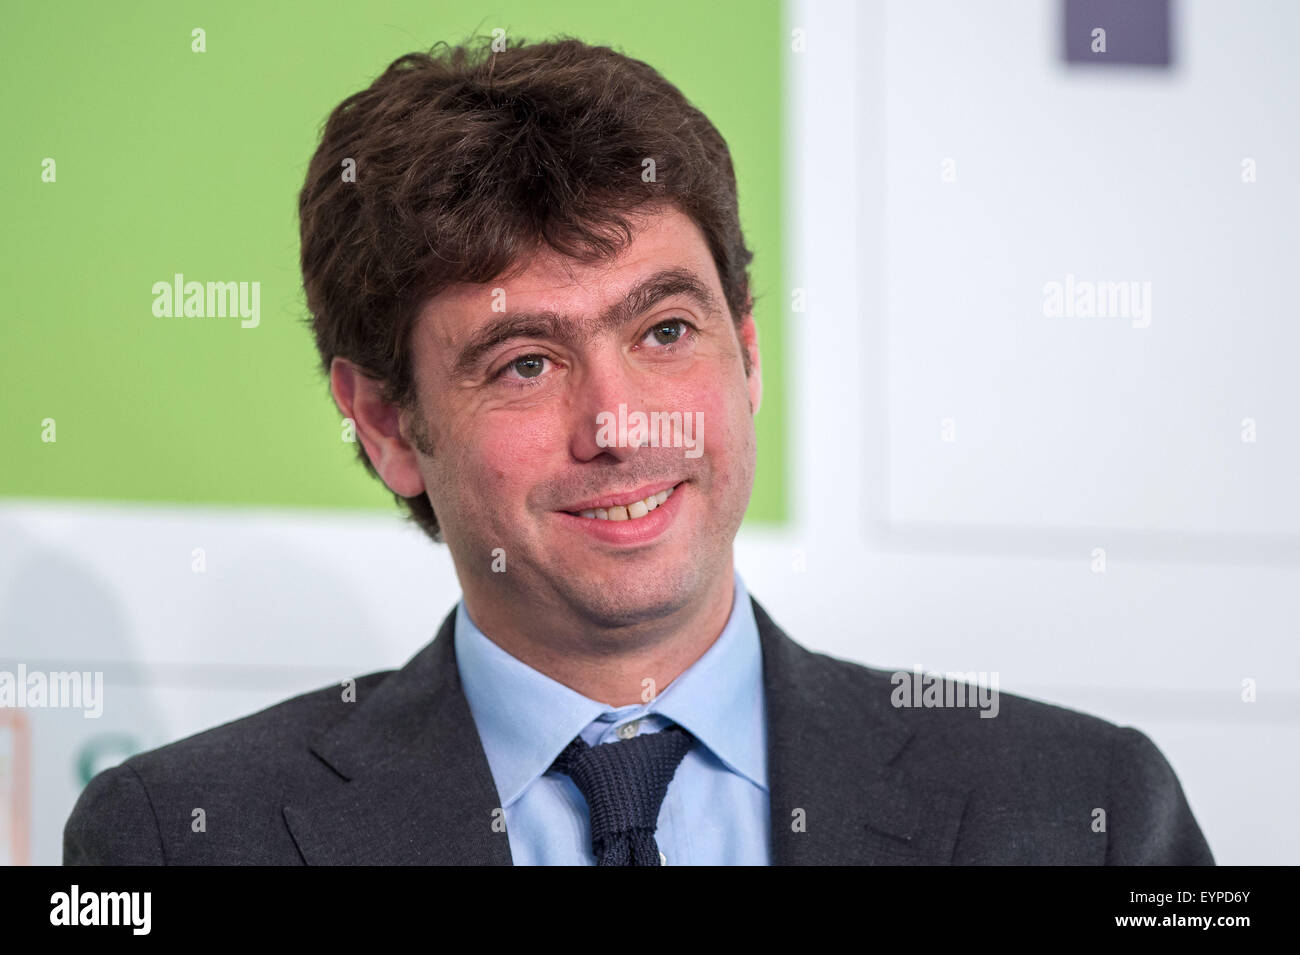 The President of Juventus Football Club Andrea Agnelli Stock Photo